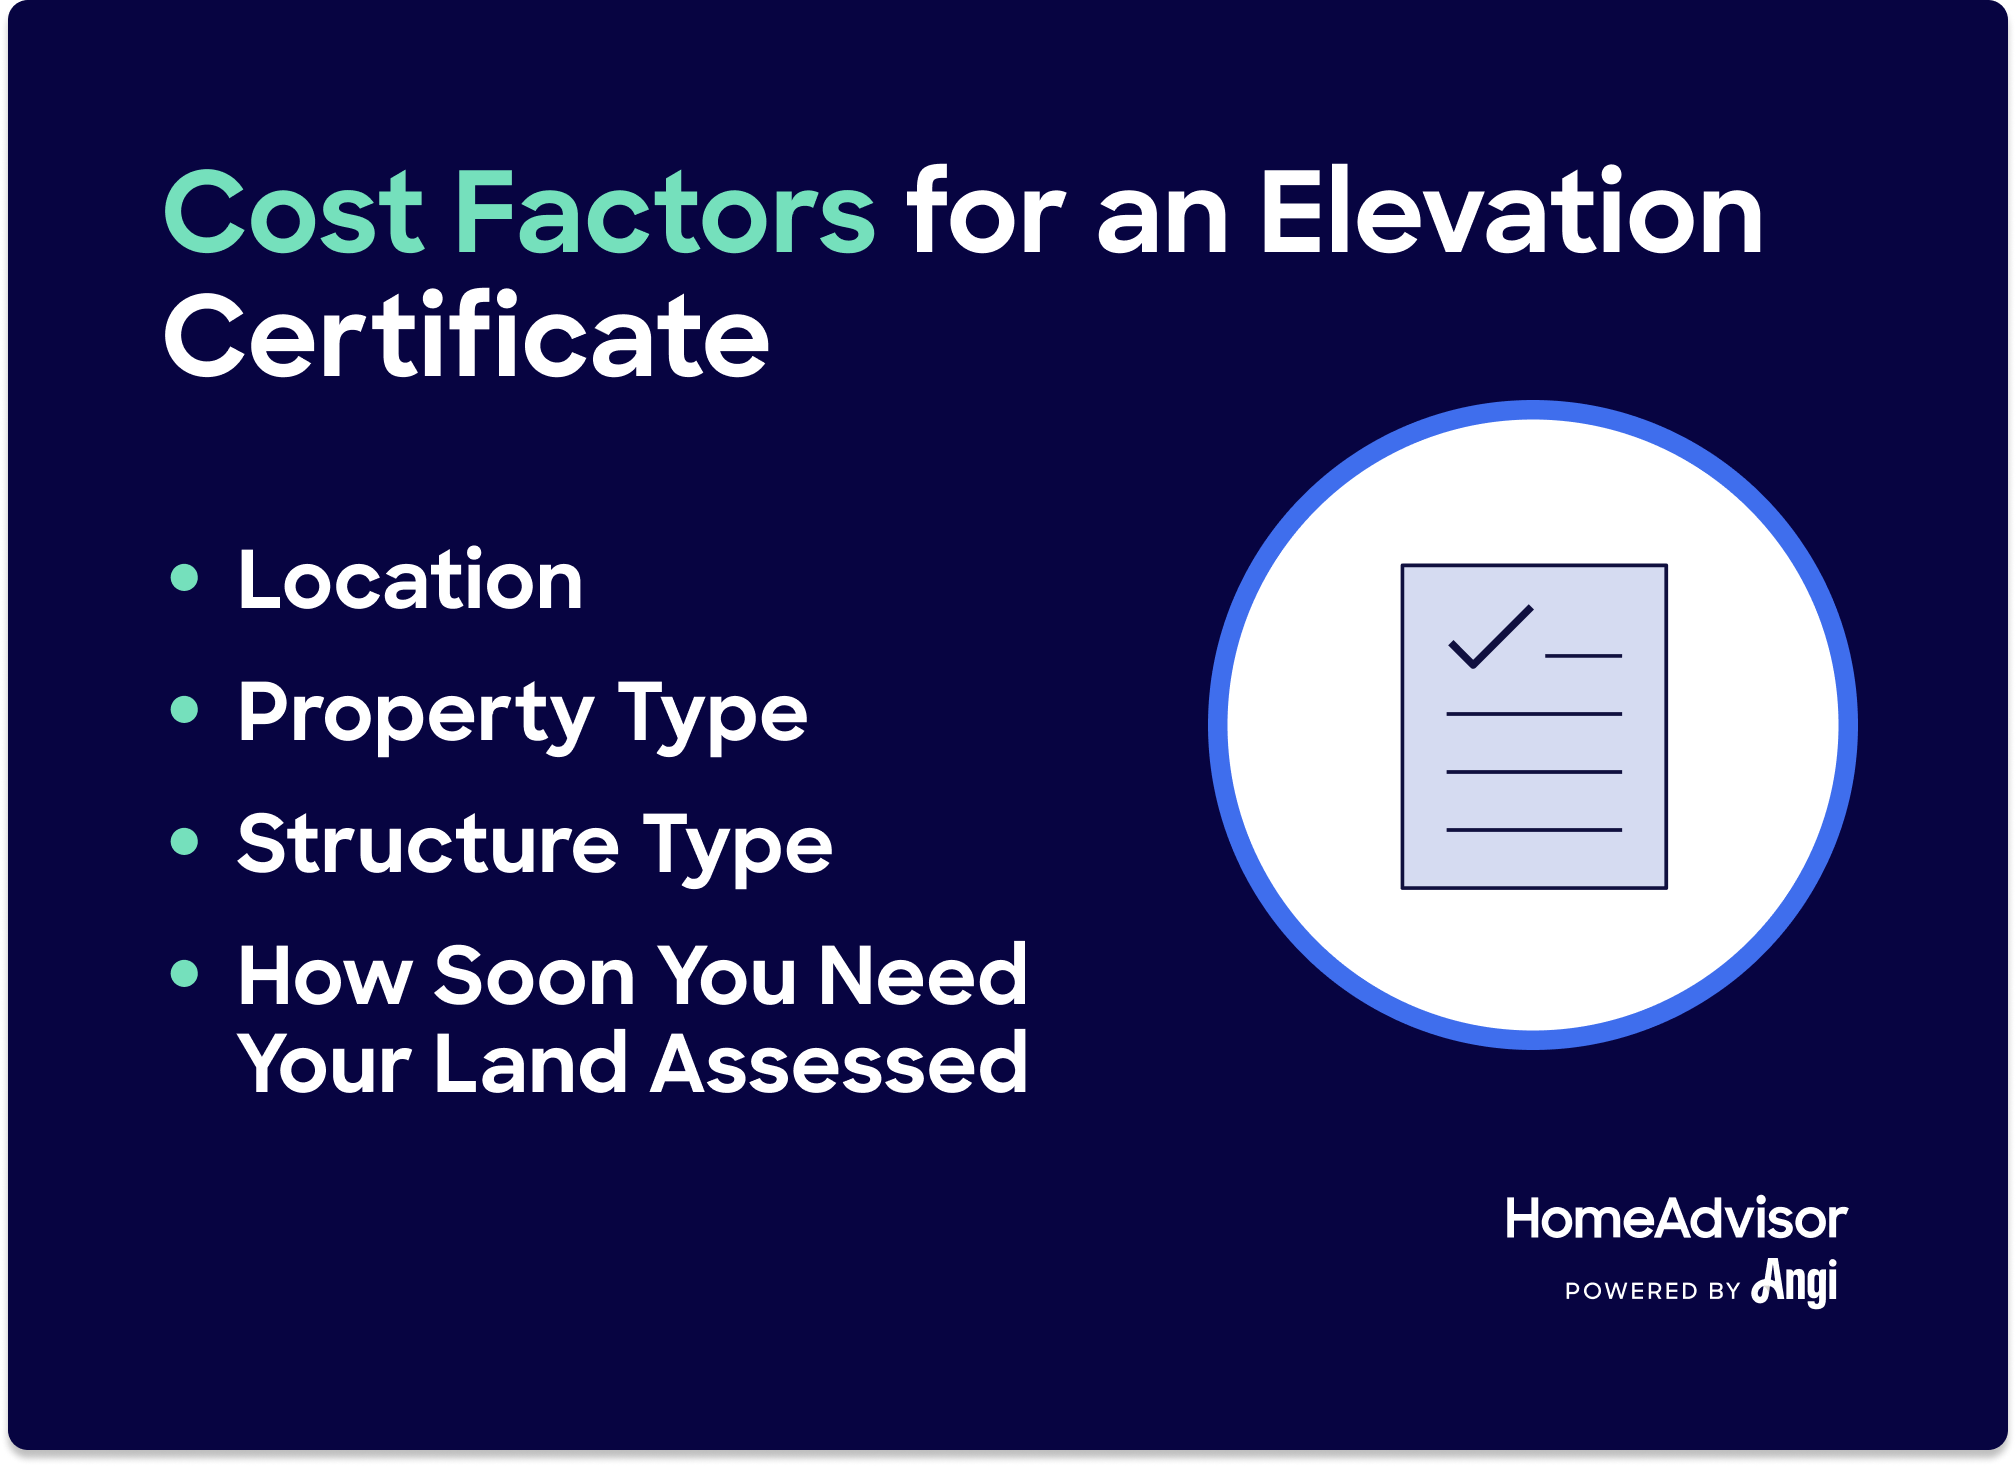 What Is the Average Cost of an Elevation Certificate?